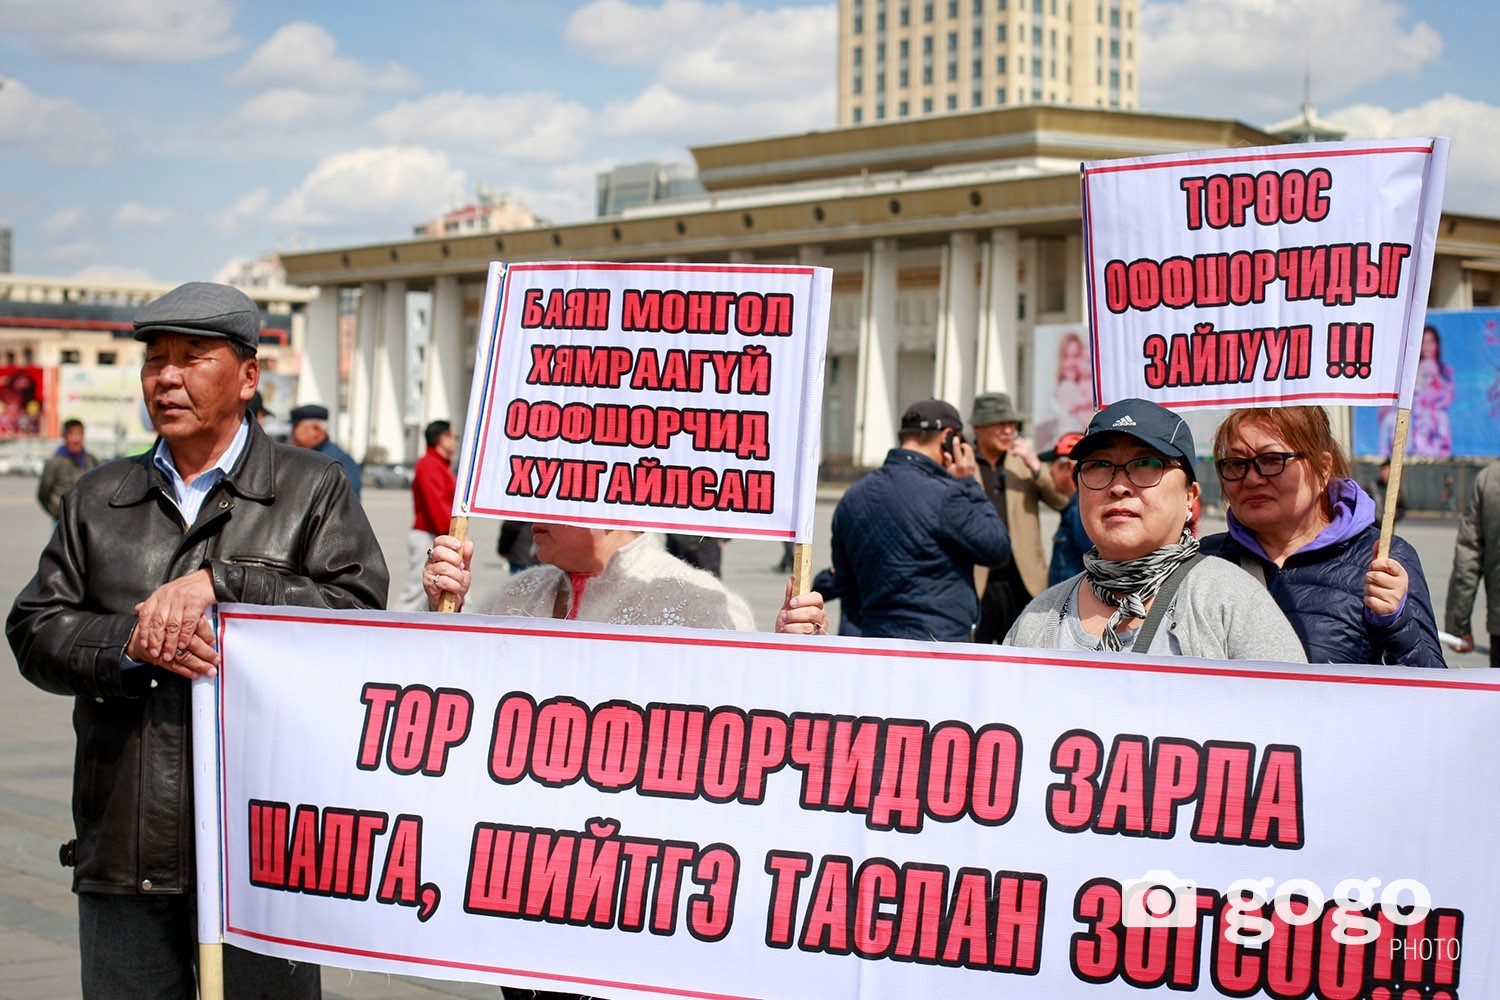 "Government of Mongolia must announce, investigate and stop the authorities and politicians with offshore accounts"